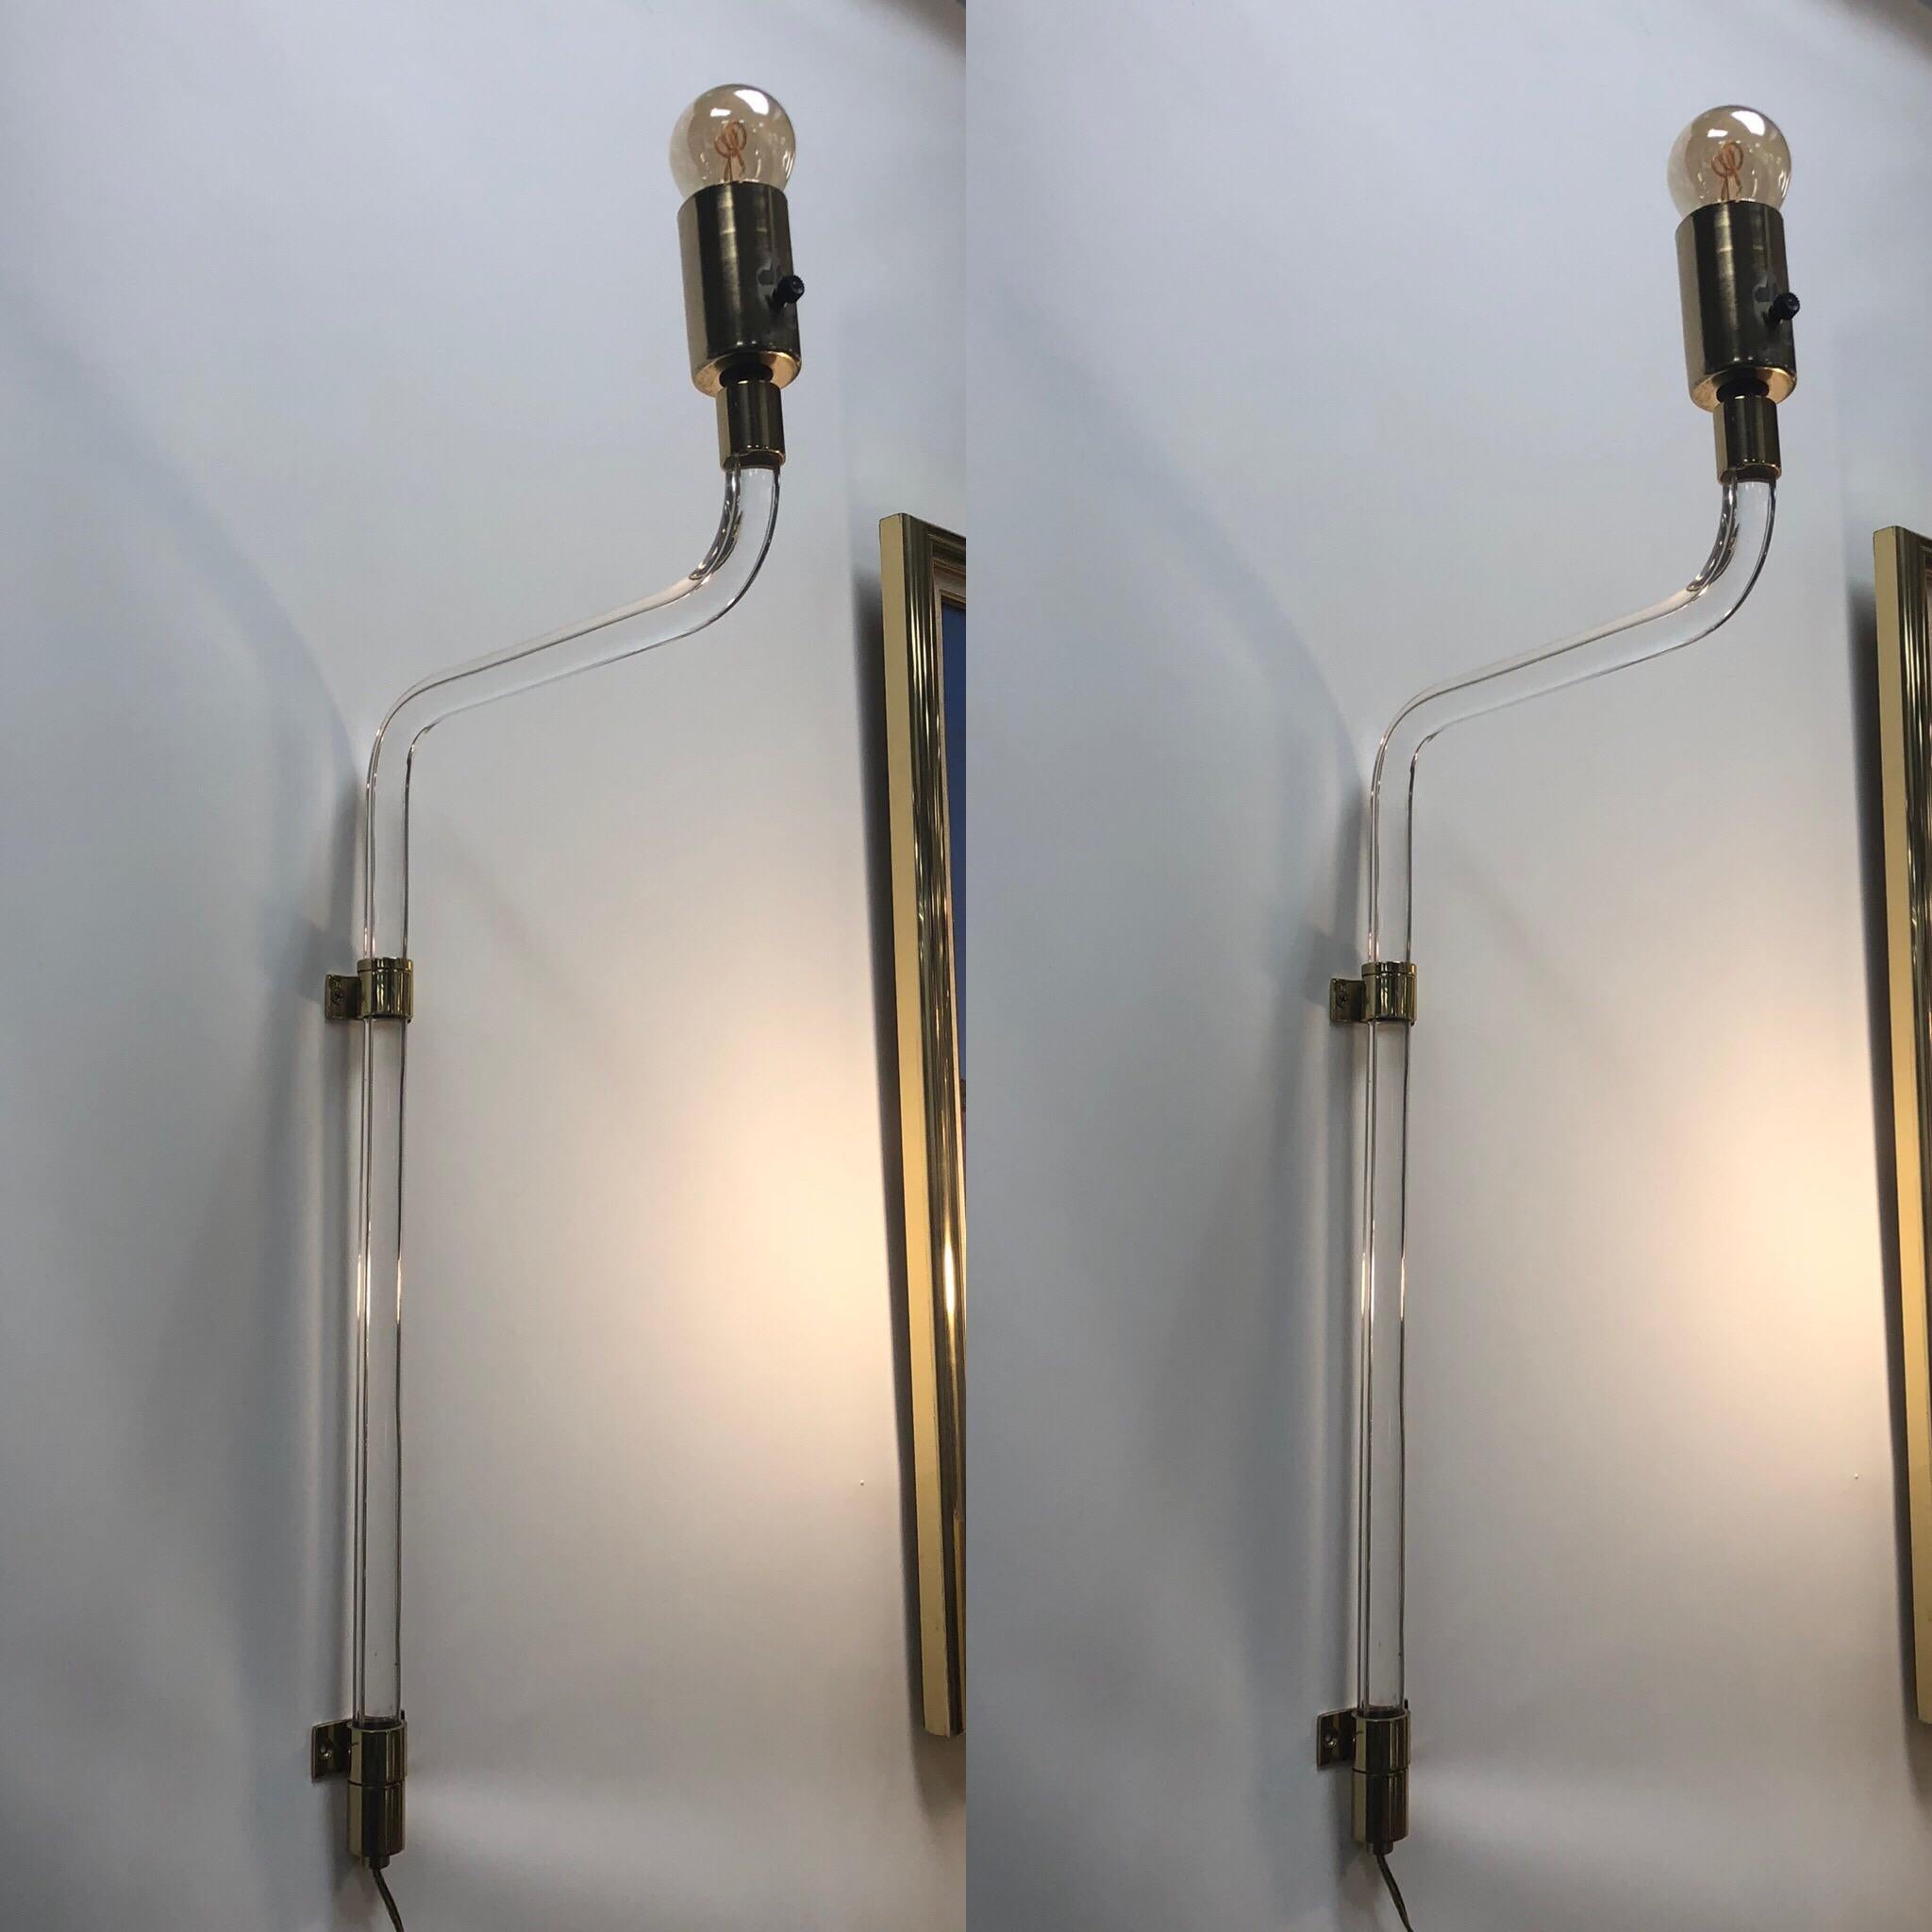 Modern Lucite and brass wall sconces by Peter Hamburger for Knoll.